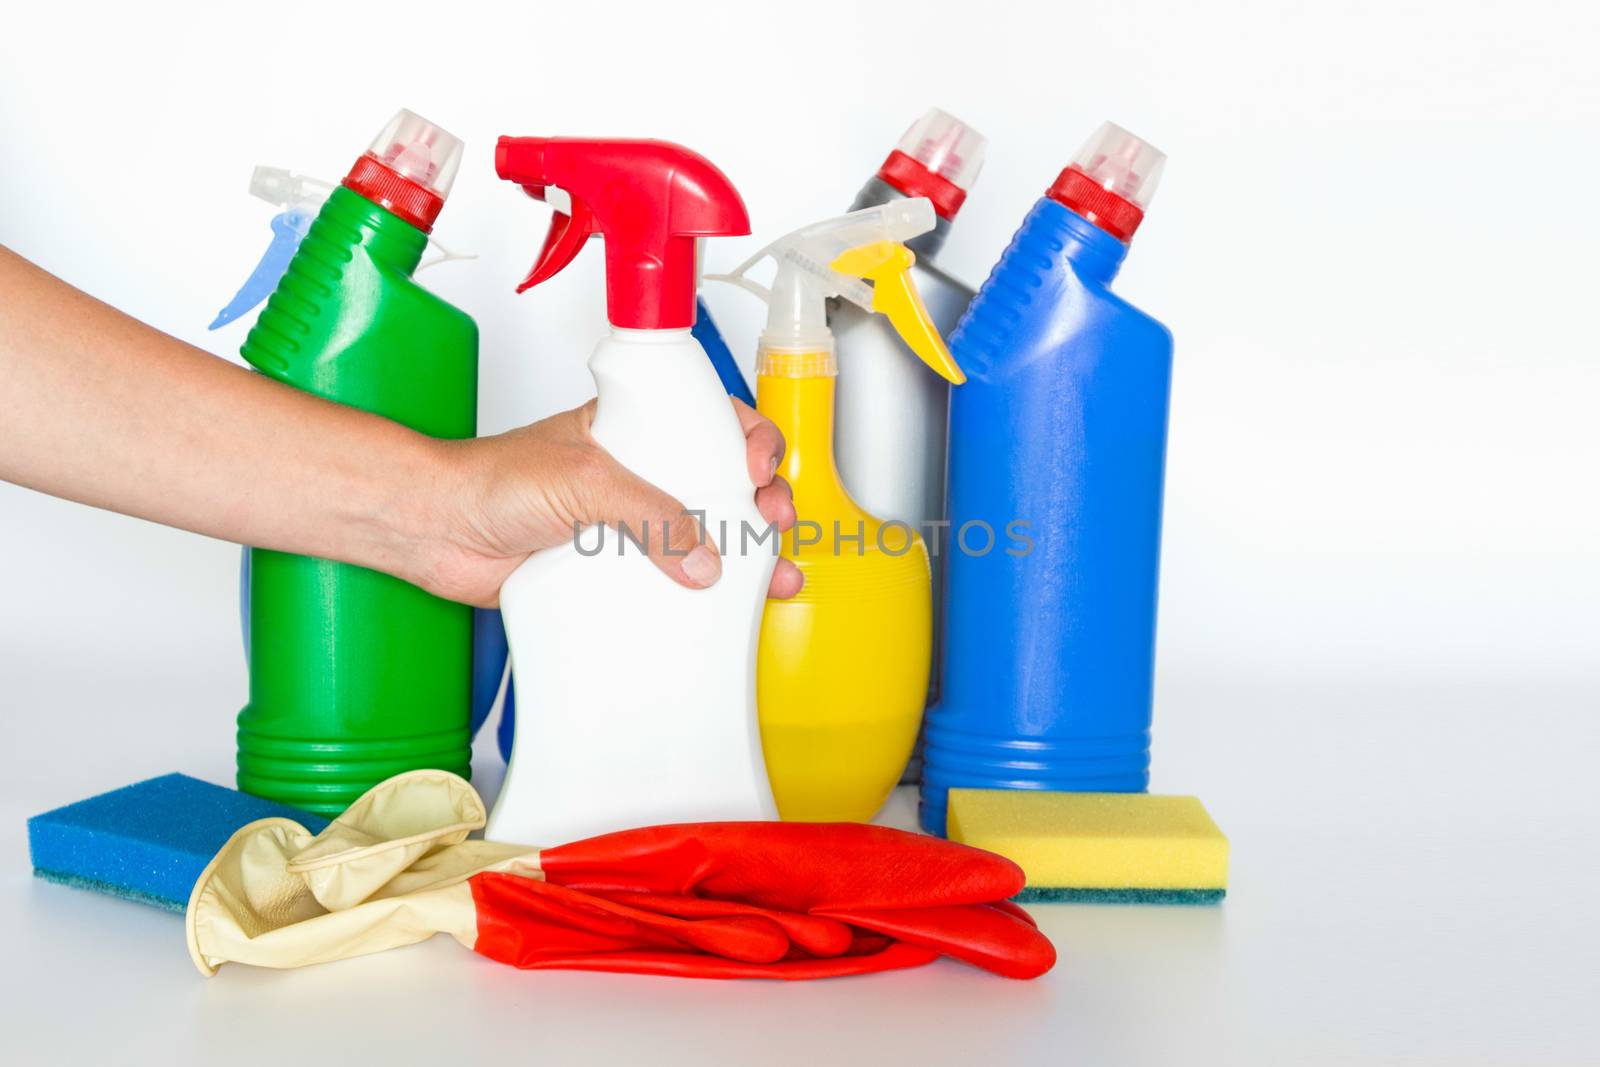 containers for household chemicals.Colorful plastic containers for household detergents, home chemistry.